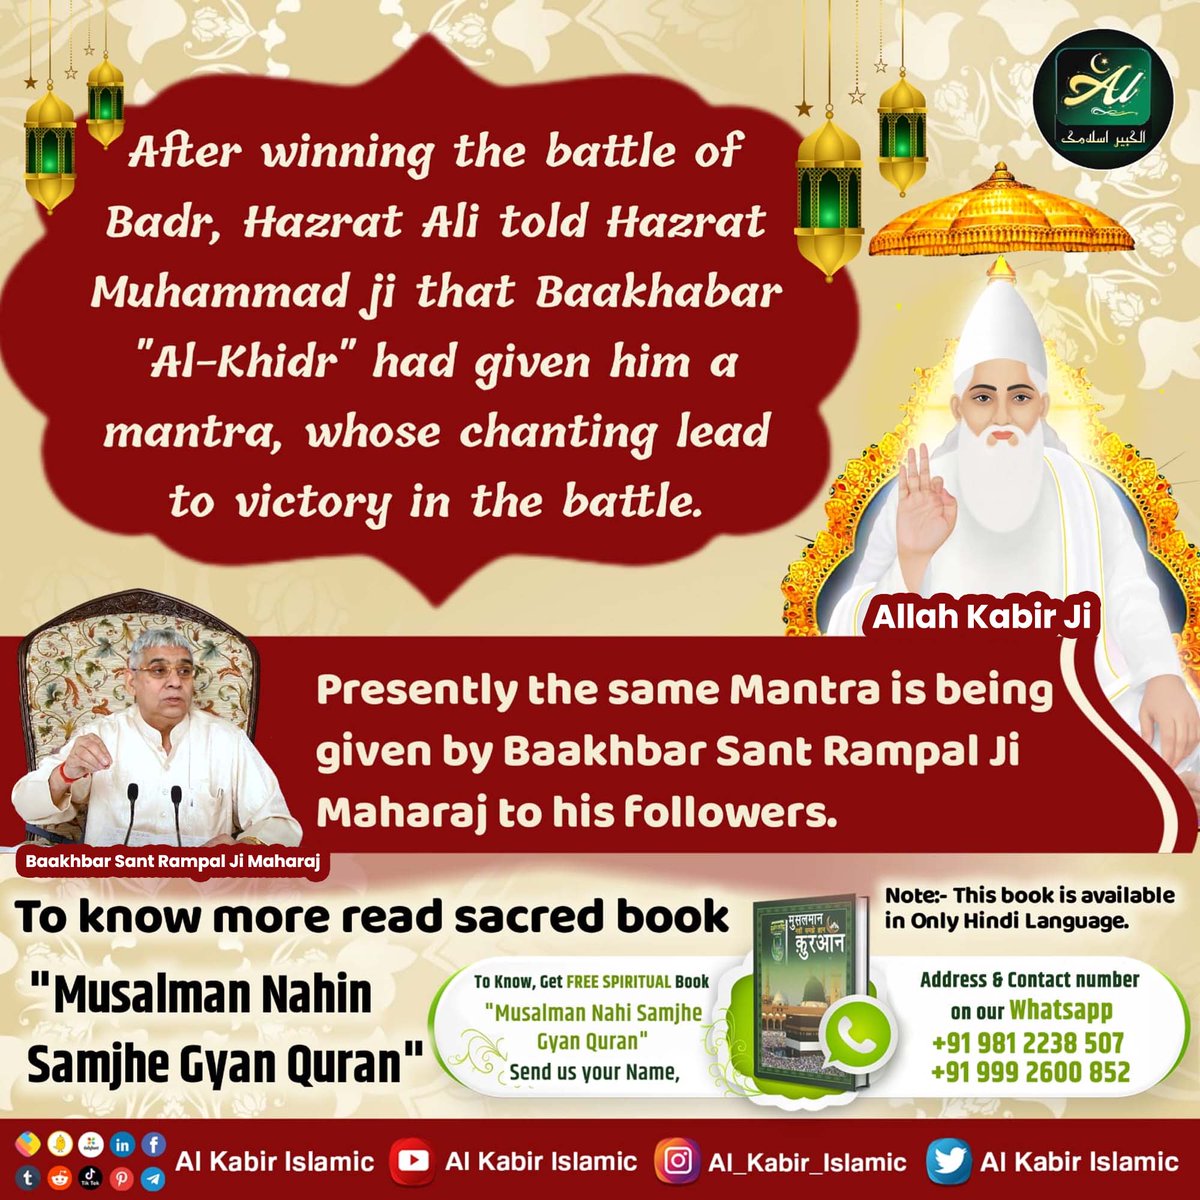 #अल्लाह_का_इल्म_बाखबर_से_पूछो
After winning the battle of Badr, Hazrat Ali told Hazrat Muhammad ji that Baakhabar'Al-Khidr' had given him a mantra, whose chanting lead to victory in the battle. Presently the same mantra is being given by Baakhabar Sant Rampal Ji to his followers.